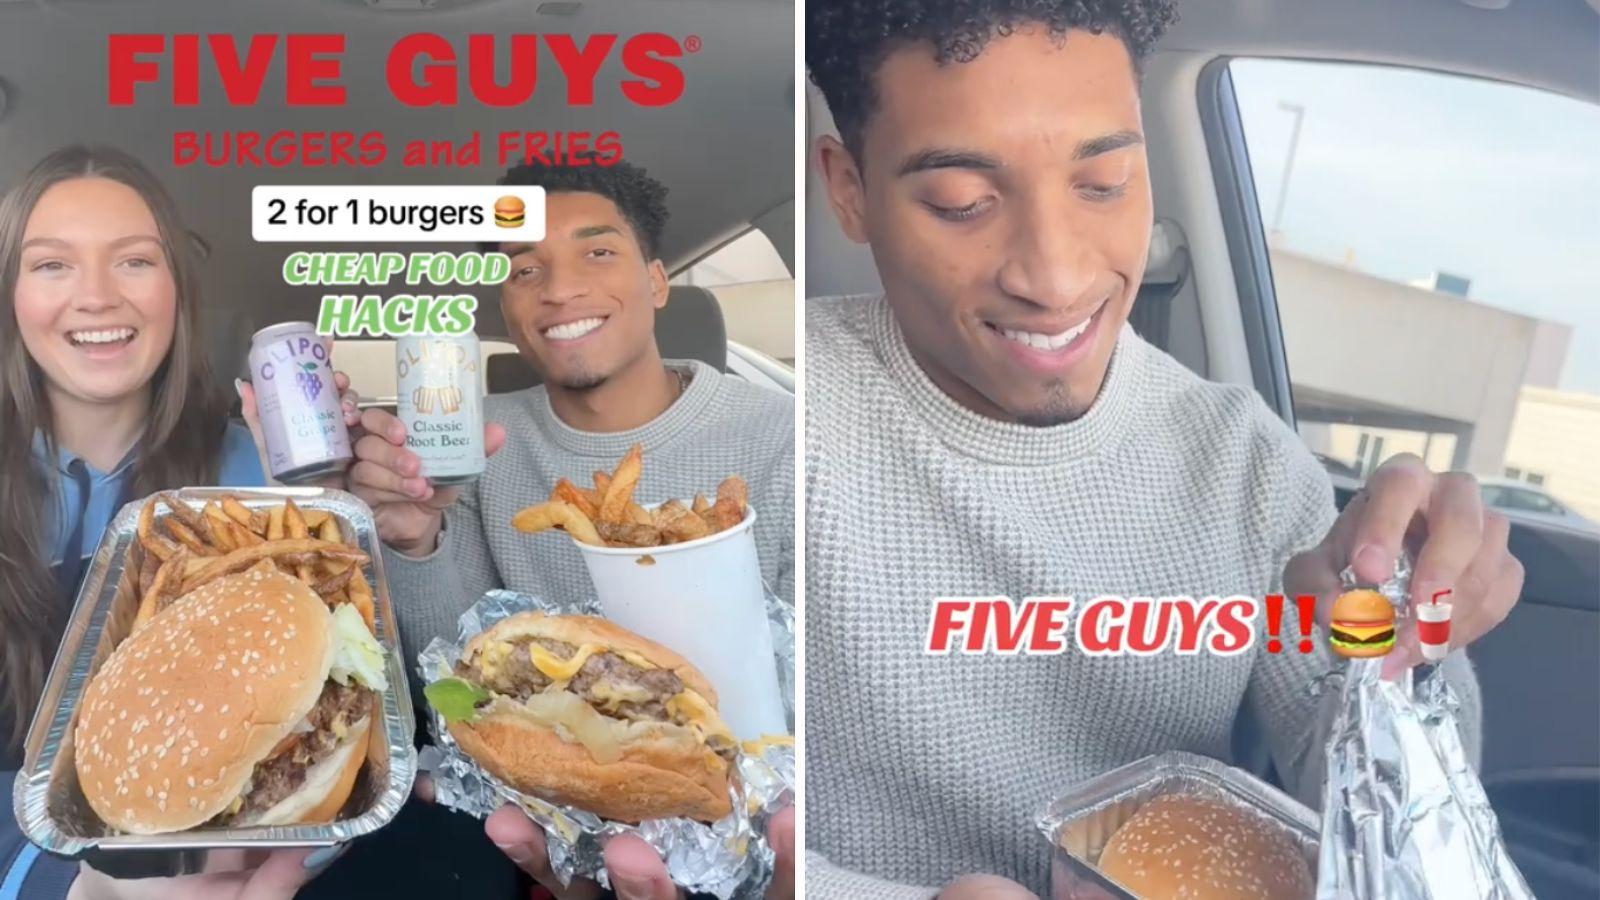 Five Guys customers share hack to get 2 burgers for price of 1